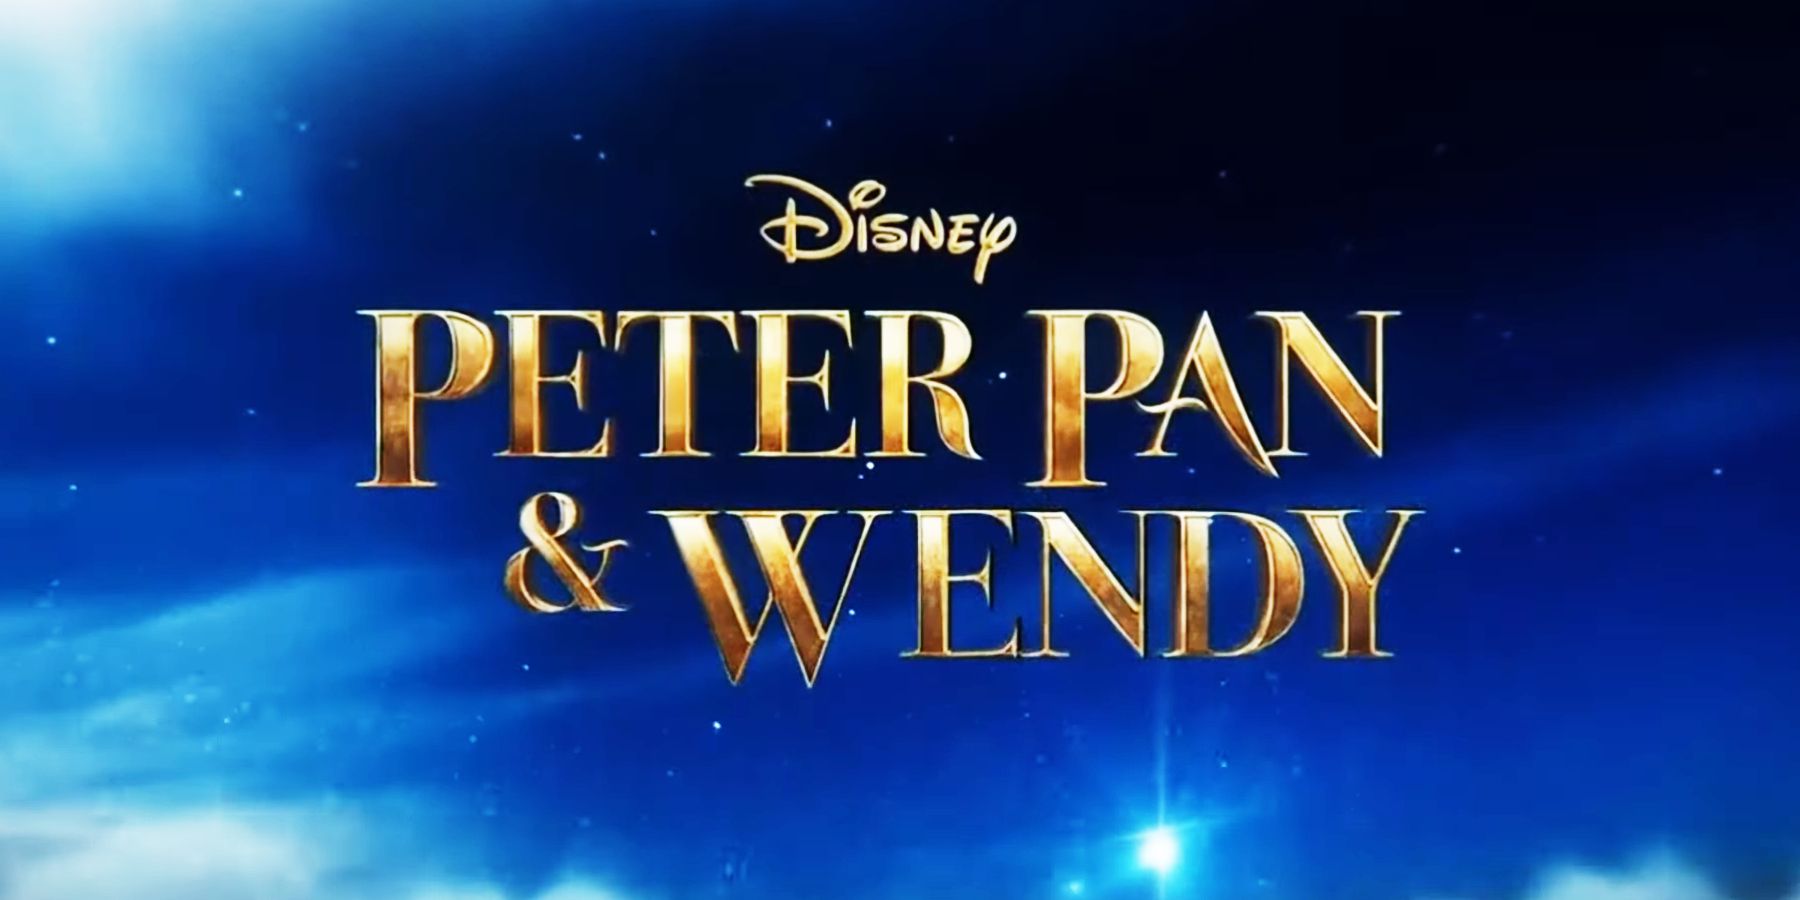 Disney's announcement trailer for Peter Pan & Wendy